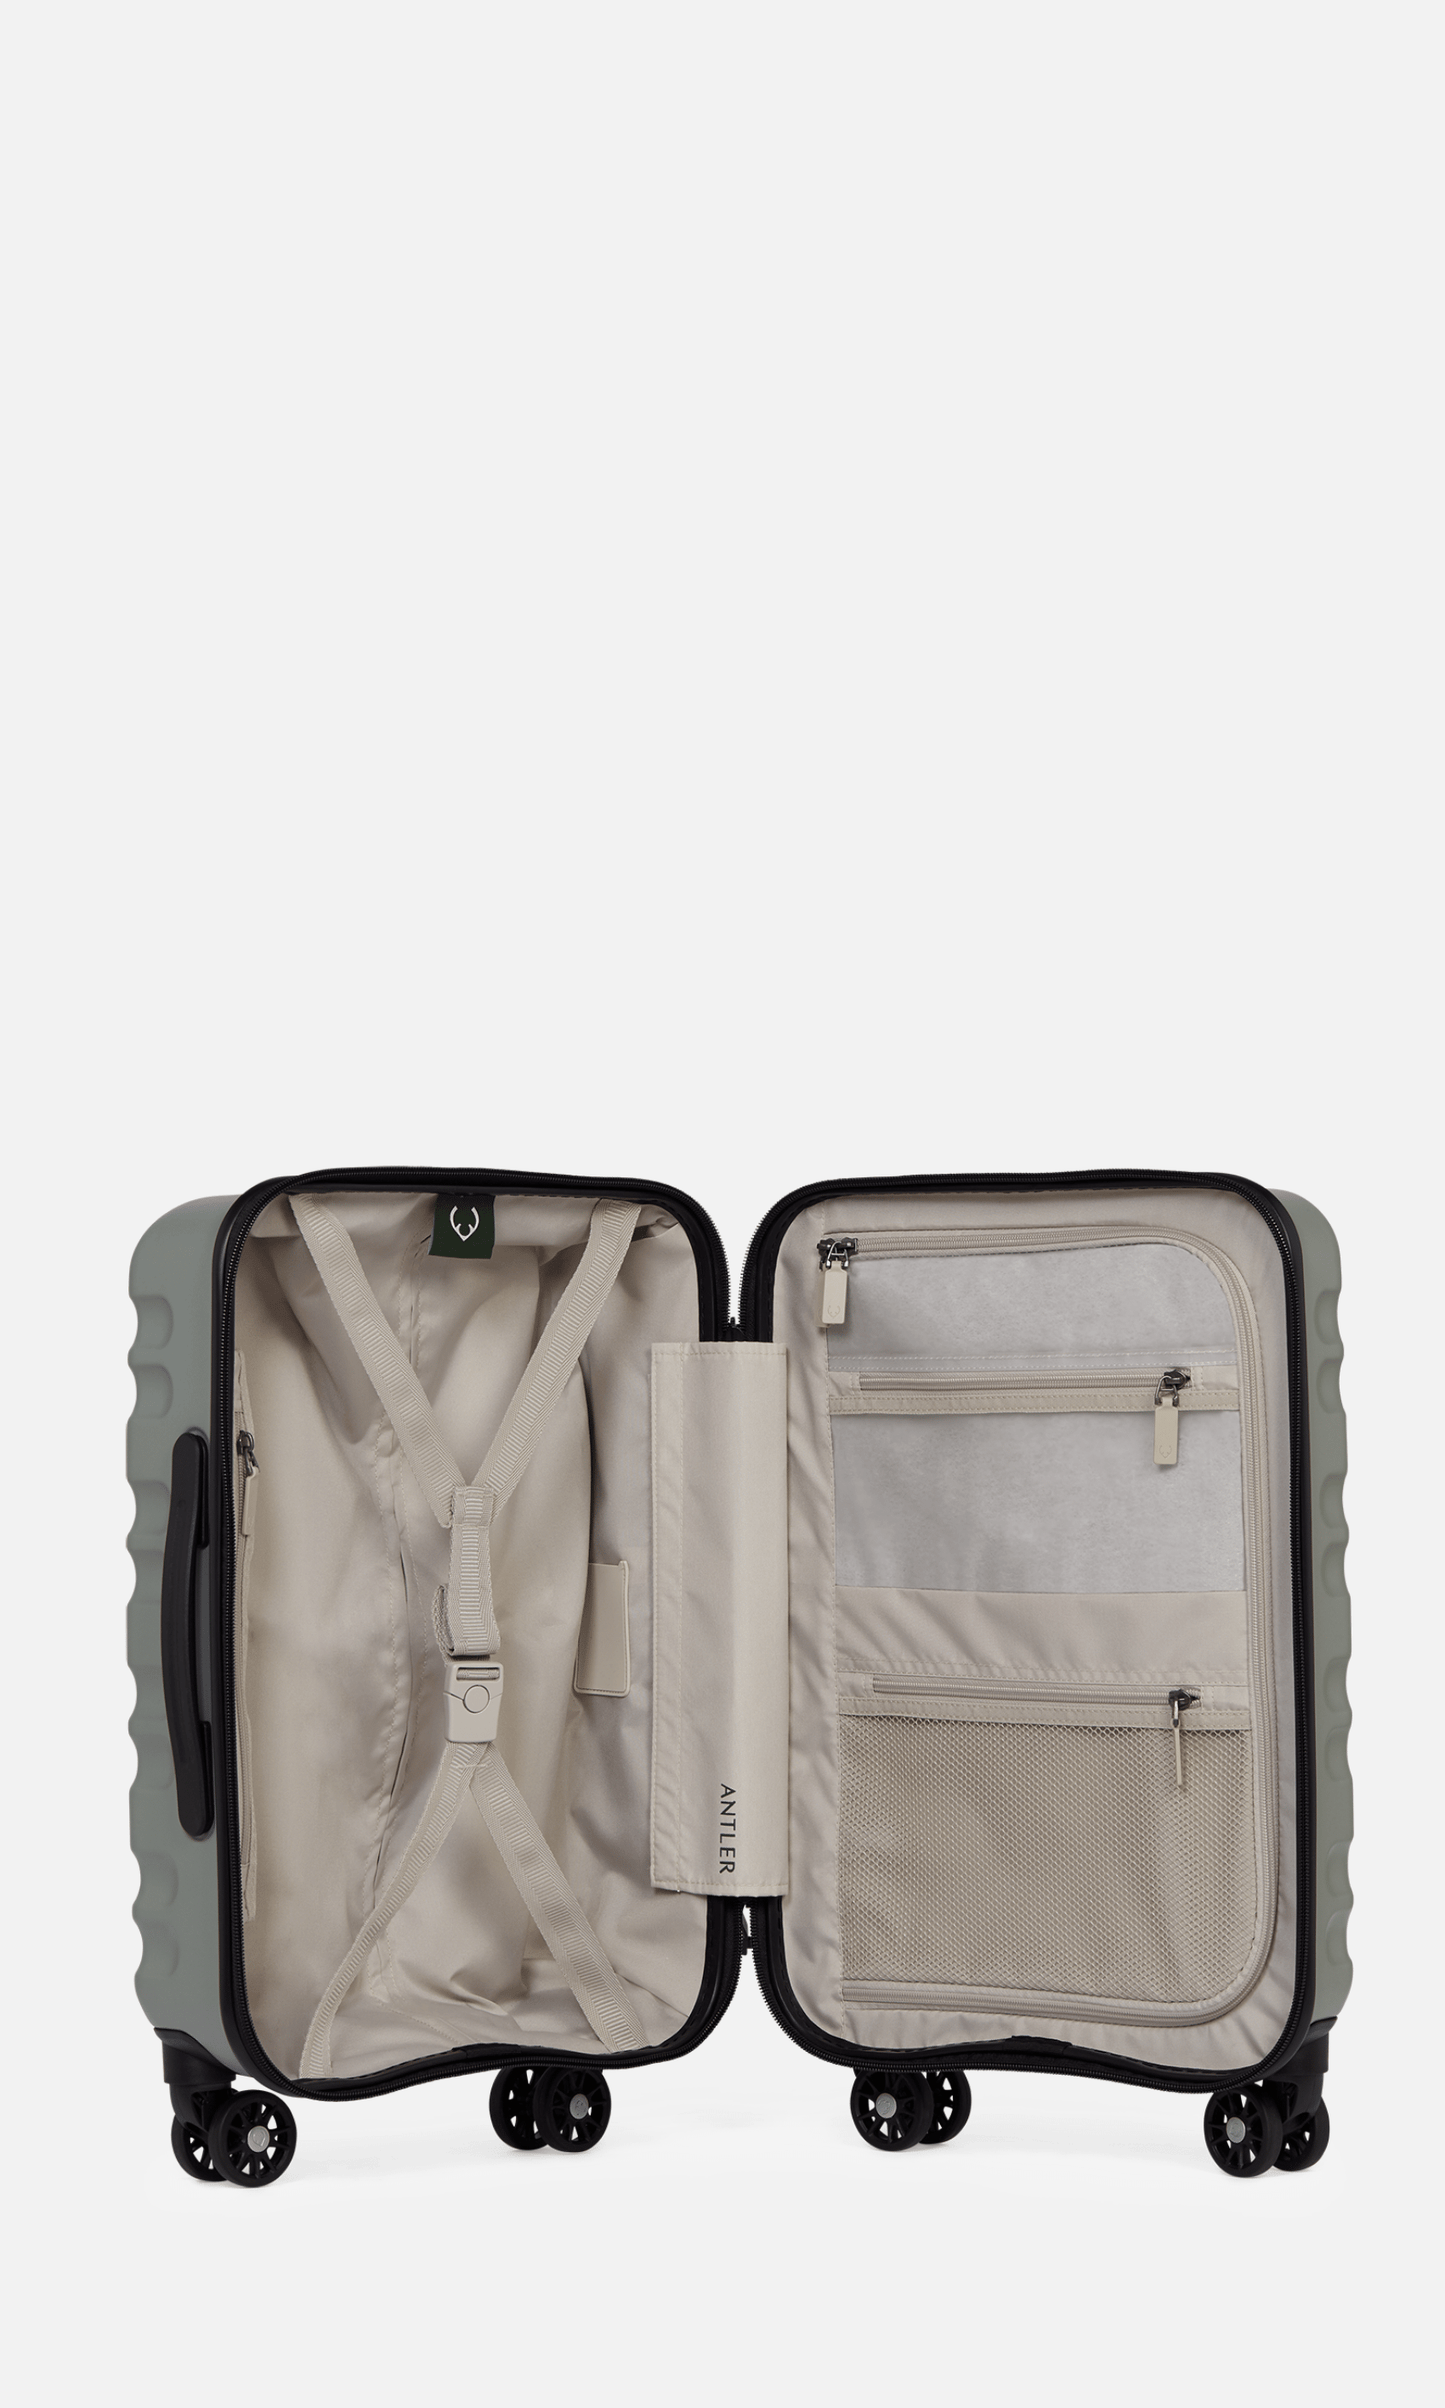 Antler Luggage -  Clifton cabin with pocket in sage - Hard Suitcases Clifton Cabin Pocket Suitcase Sage (Green) | Hard Suitcase | Antler UK